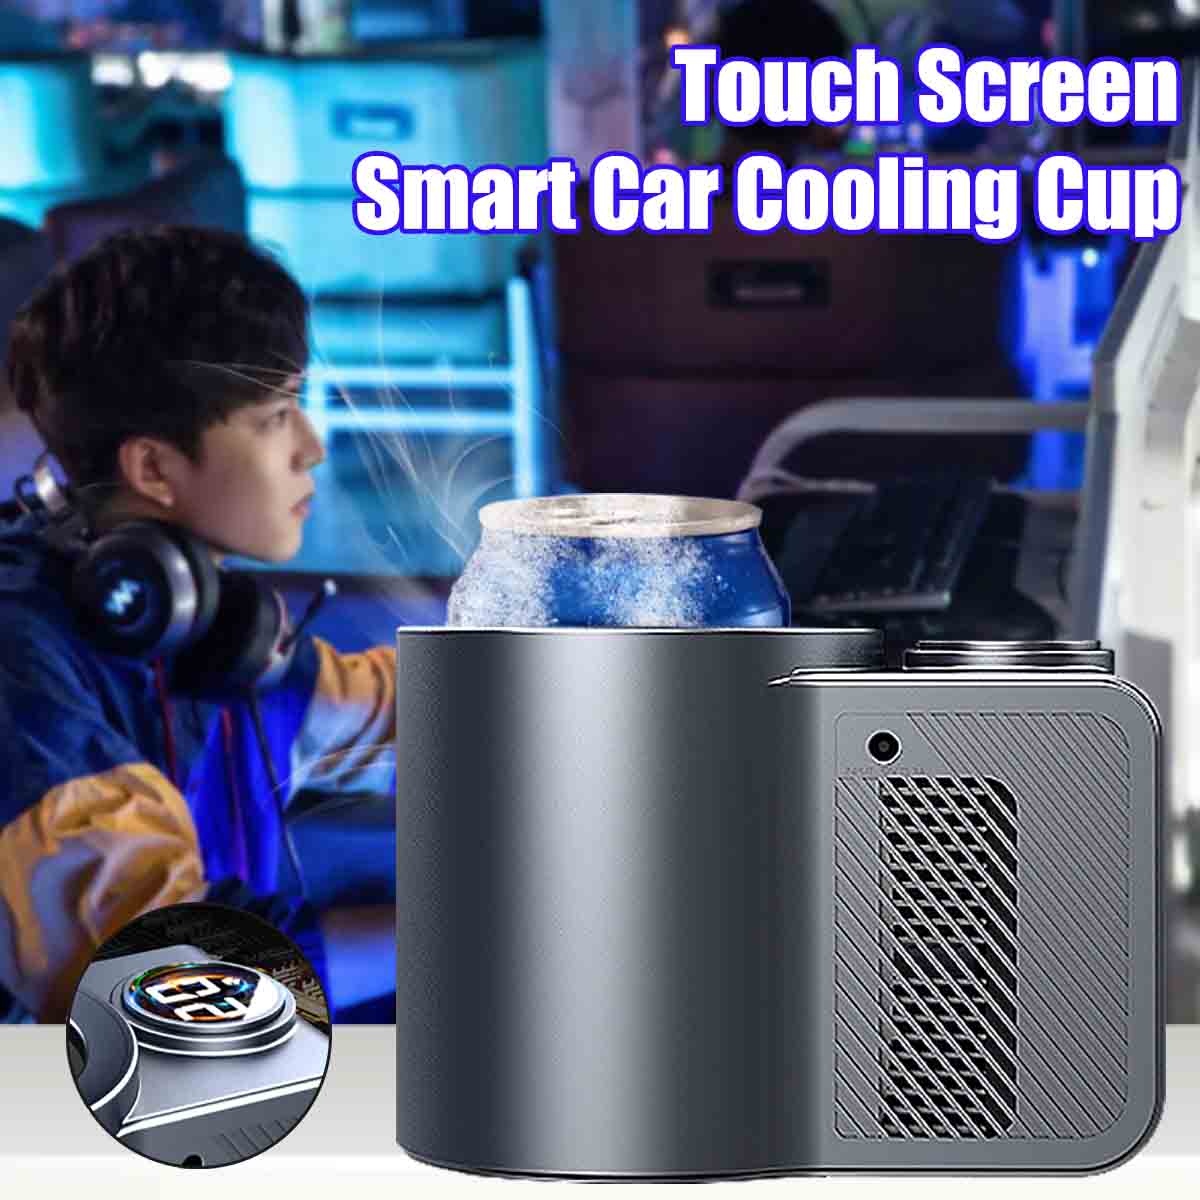 Bakeey-Touch-Screen-Smart-Car-Cooling-Cup-With-Temperature-Display-Cooling-Drinks-Holders-1857302-1